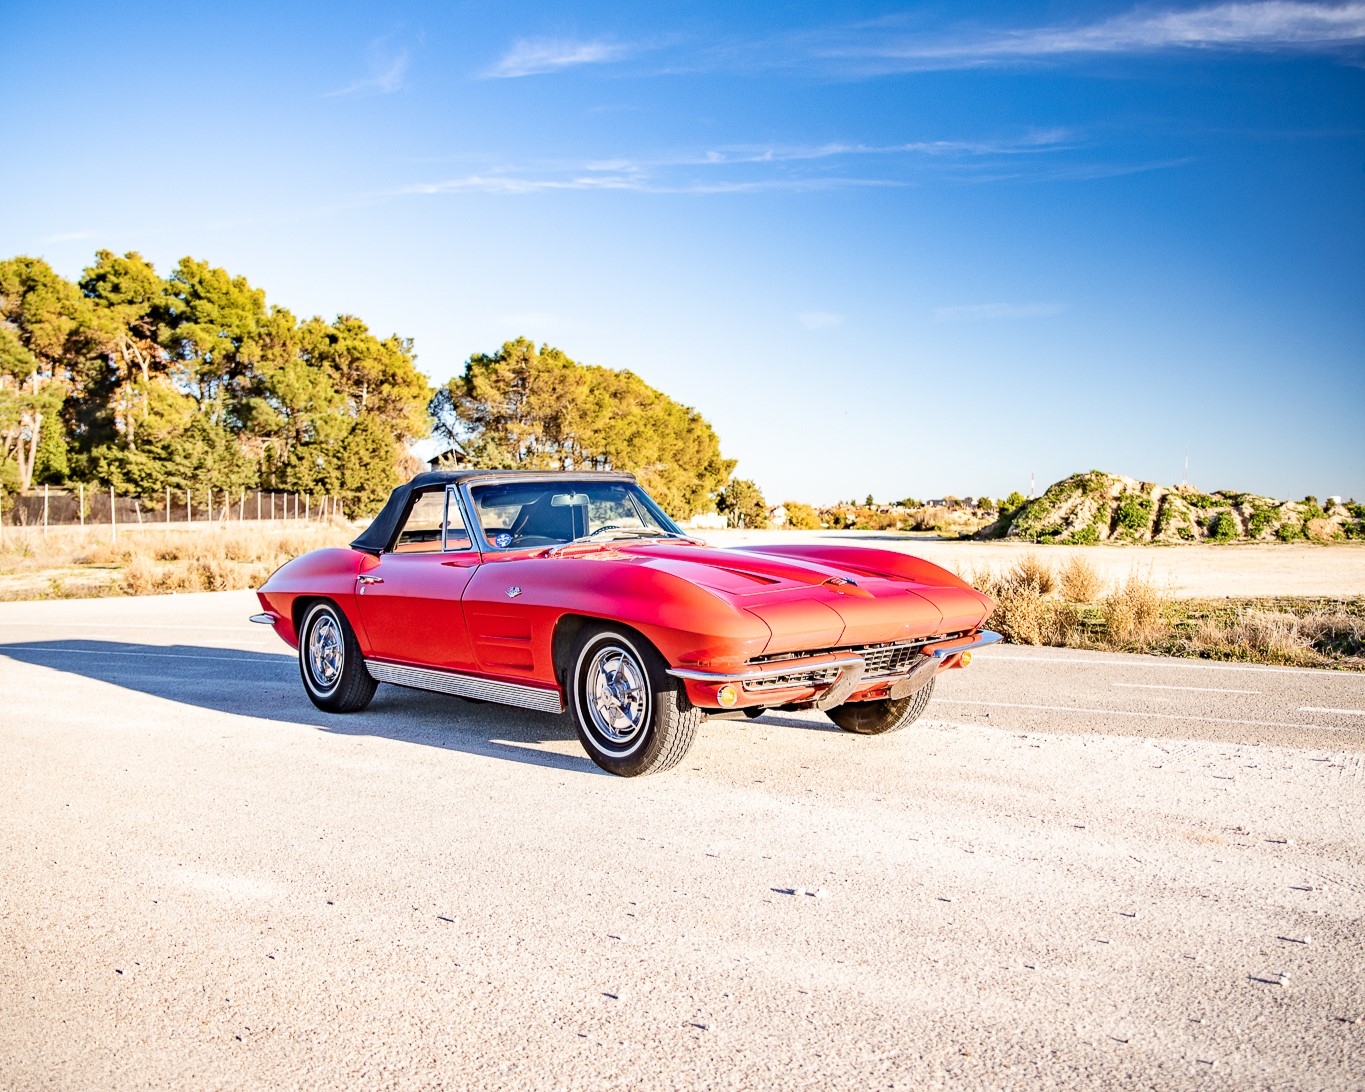 1963 Chevrolet Corvette Sting Ray Convertible ©2021 Courtesy of RM Sotheby's